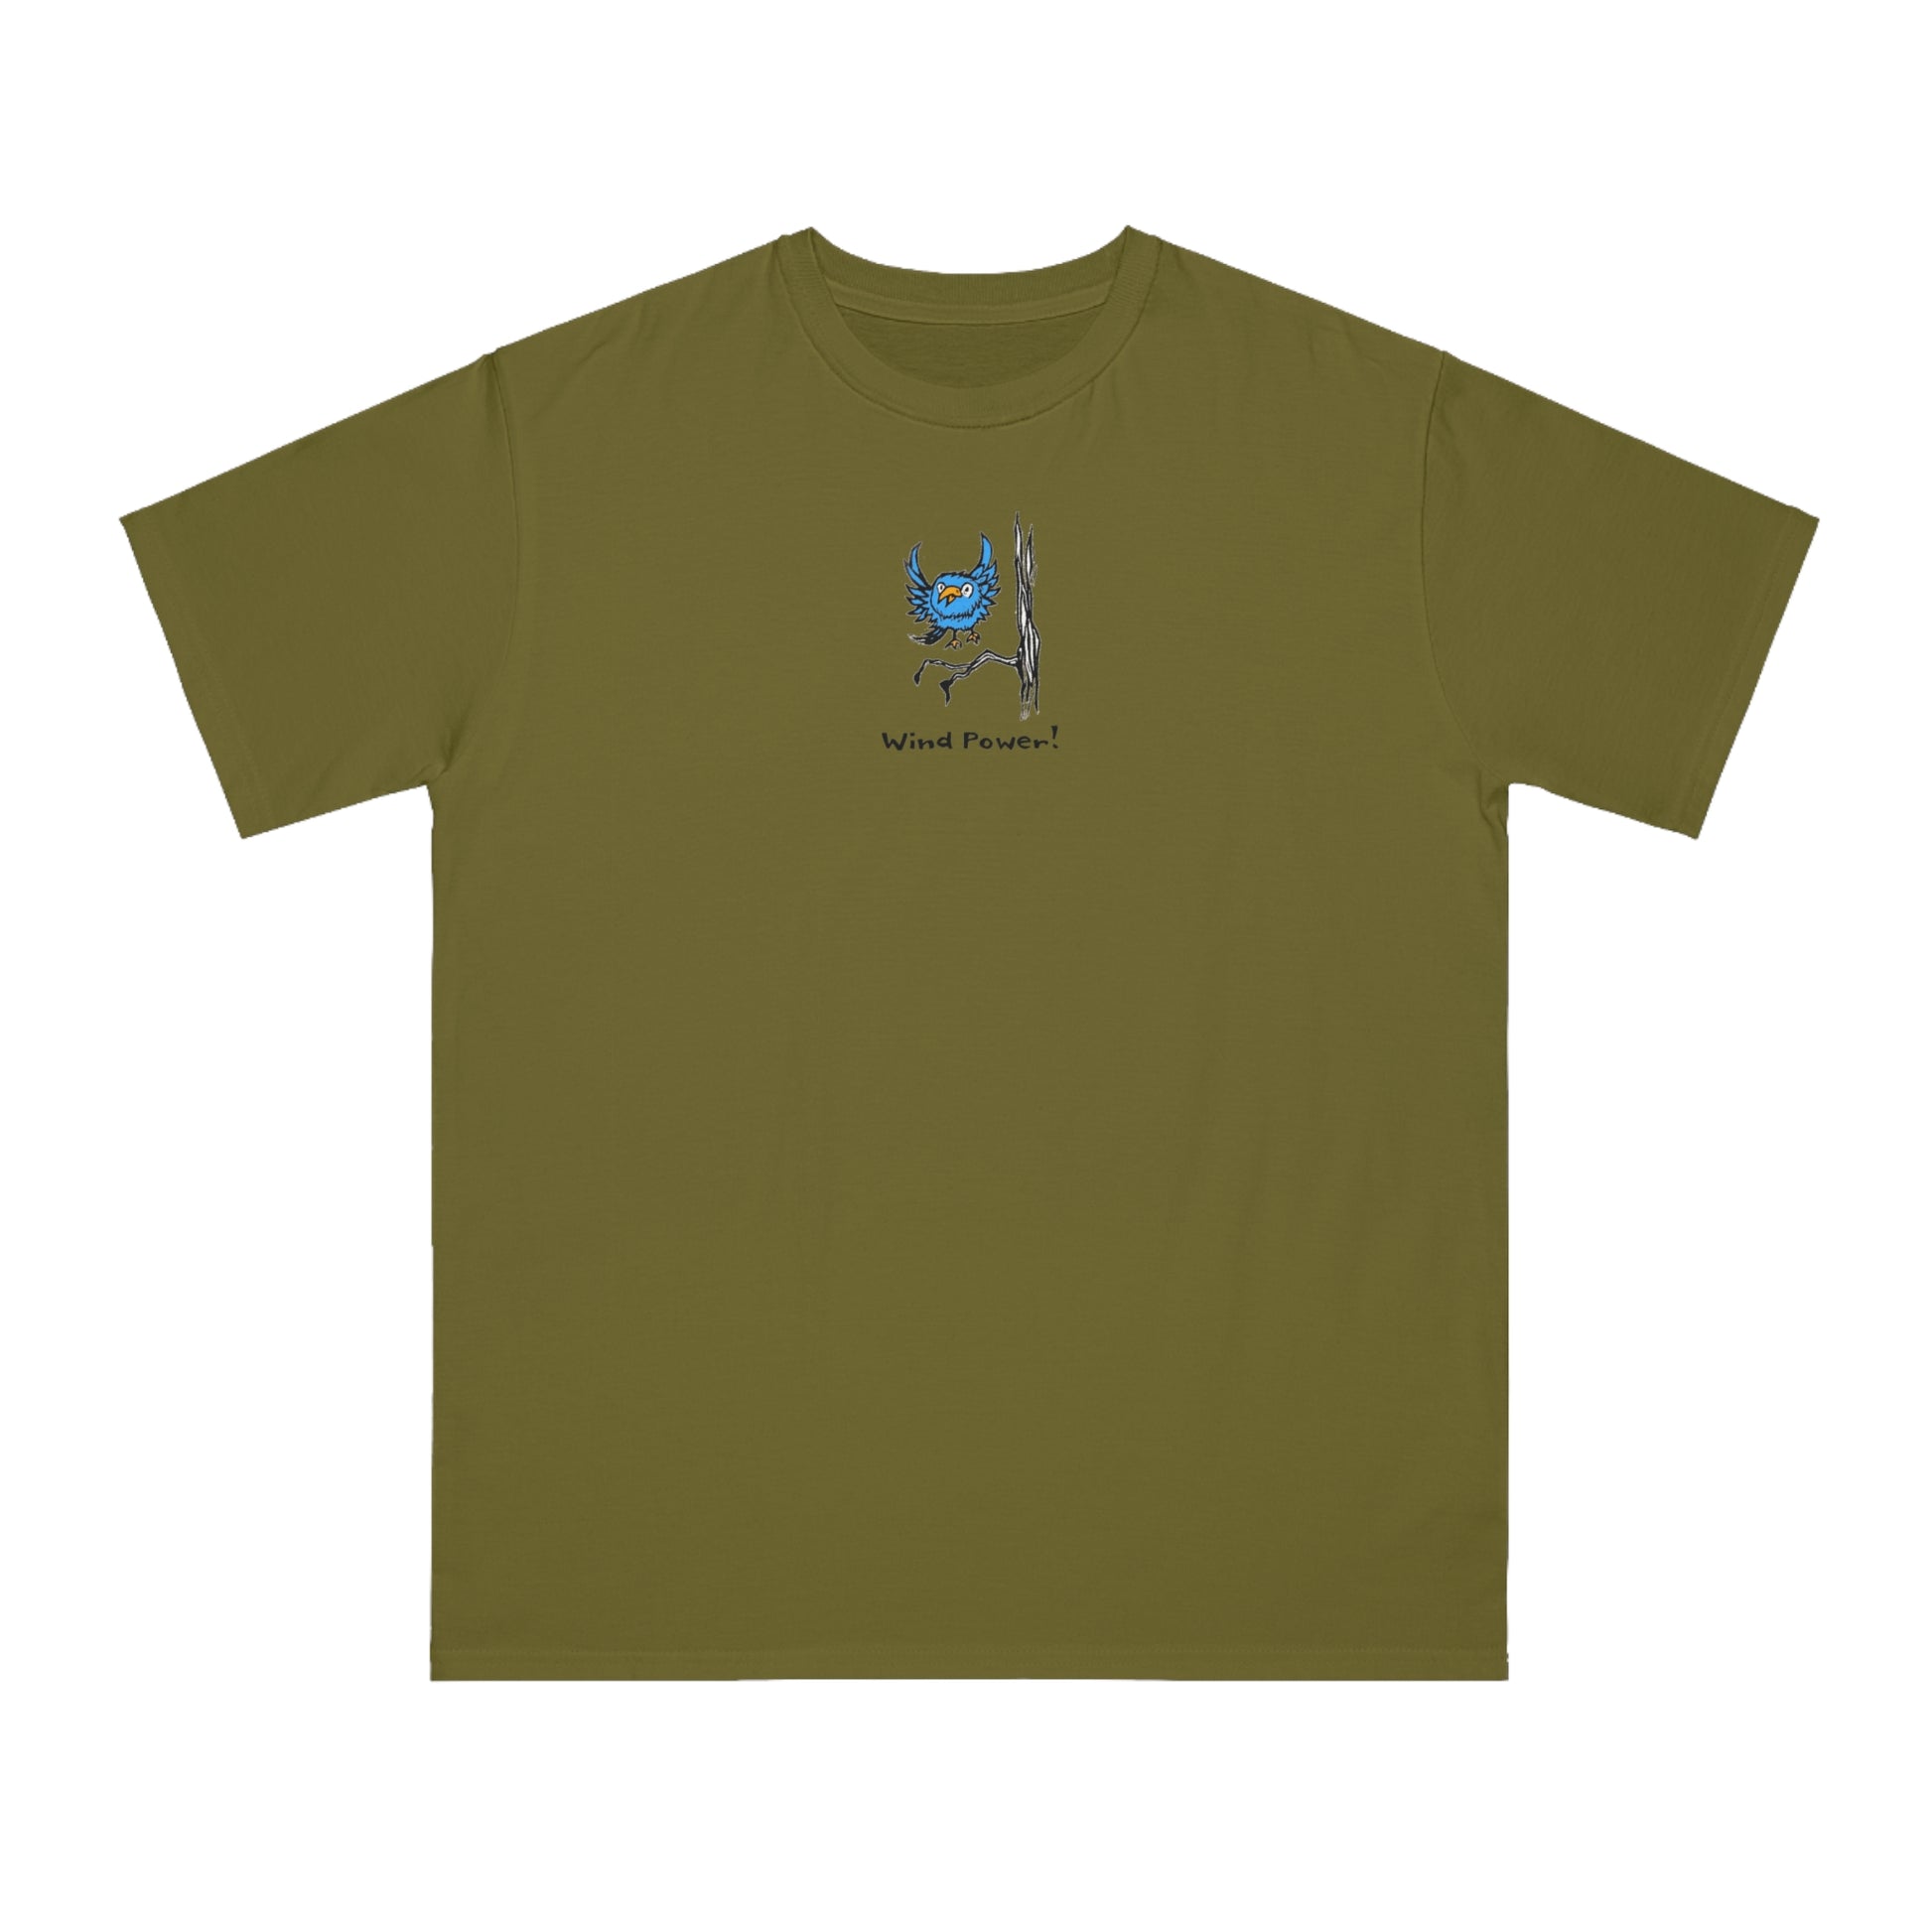 Blue bird with orange beak flying over branch on tree on olive color unisex men's t-shirt. Text under it reads Wind Power